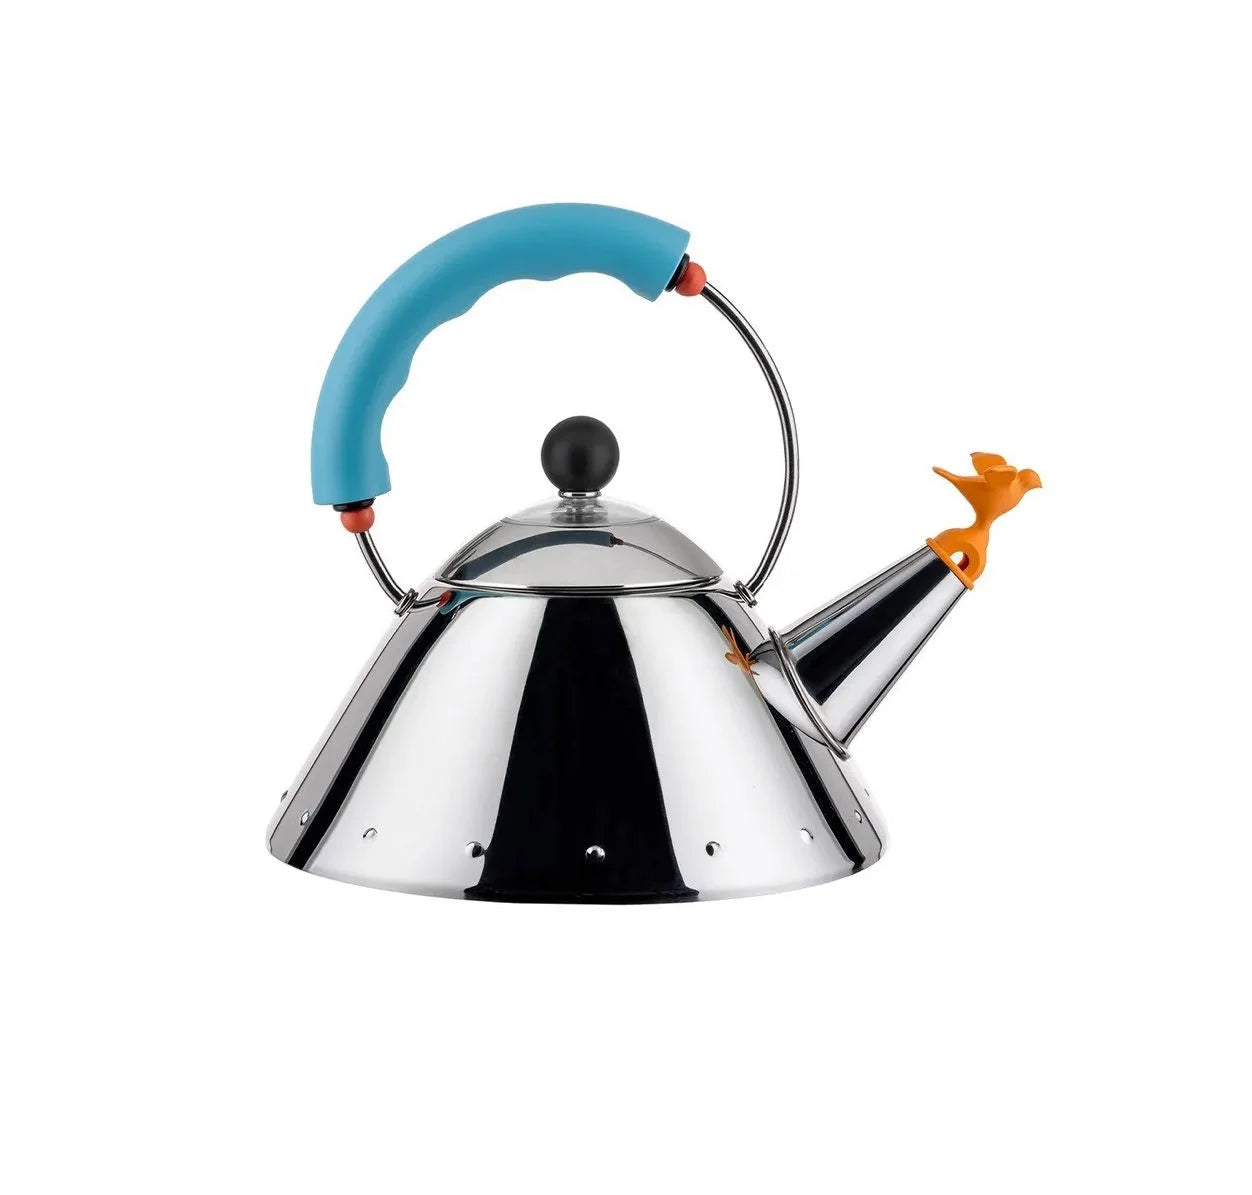 Replacement Alessi bird whistle for 9093 Michael Graves Kettle Orange